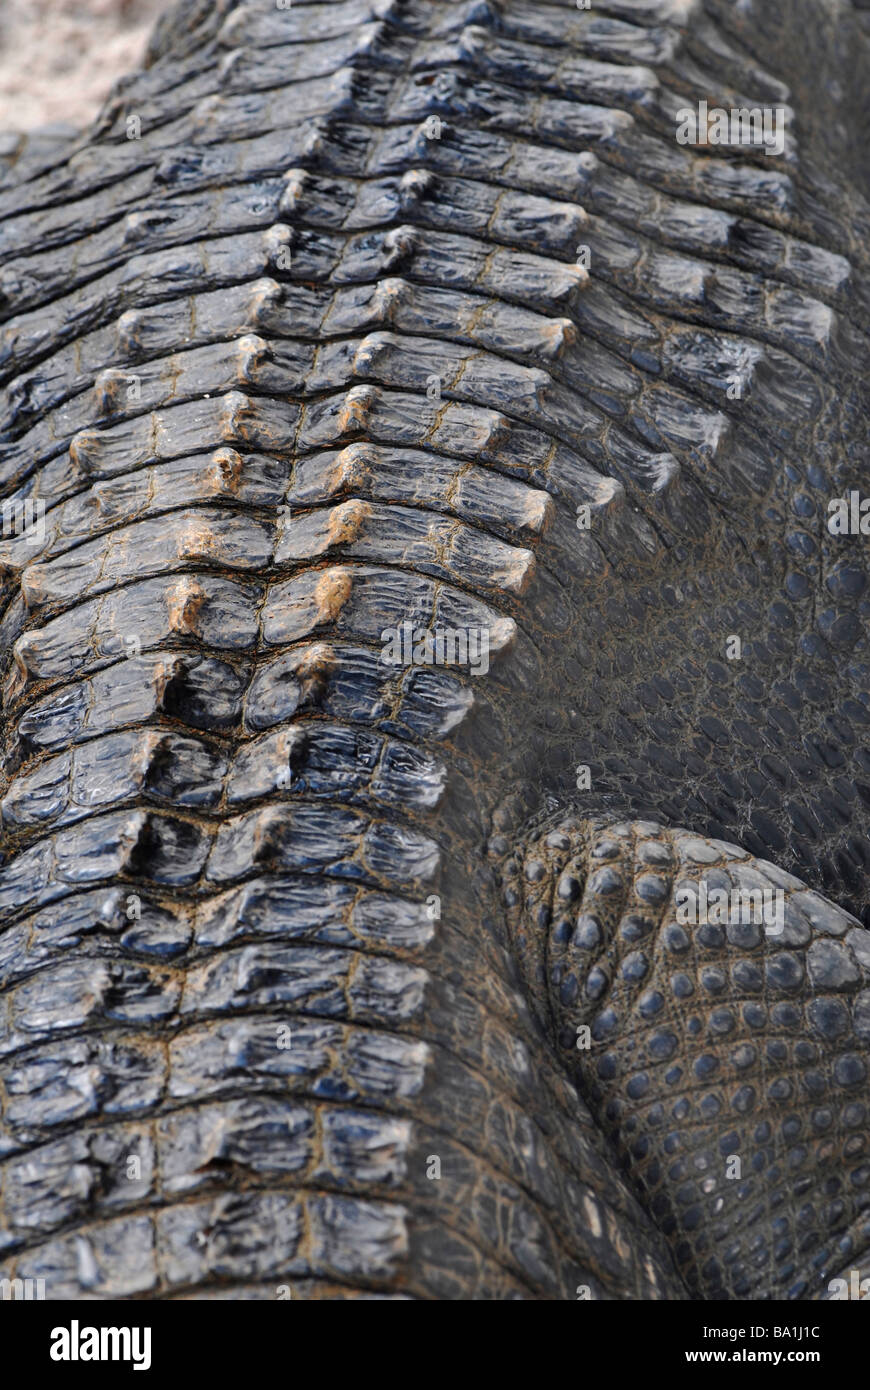 A close up photo of the skin of an American alligator (Alligator mississippiensis). Stock Photo